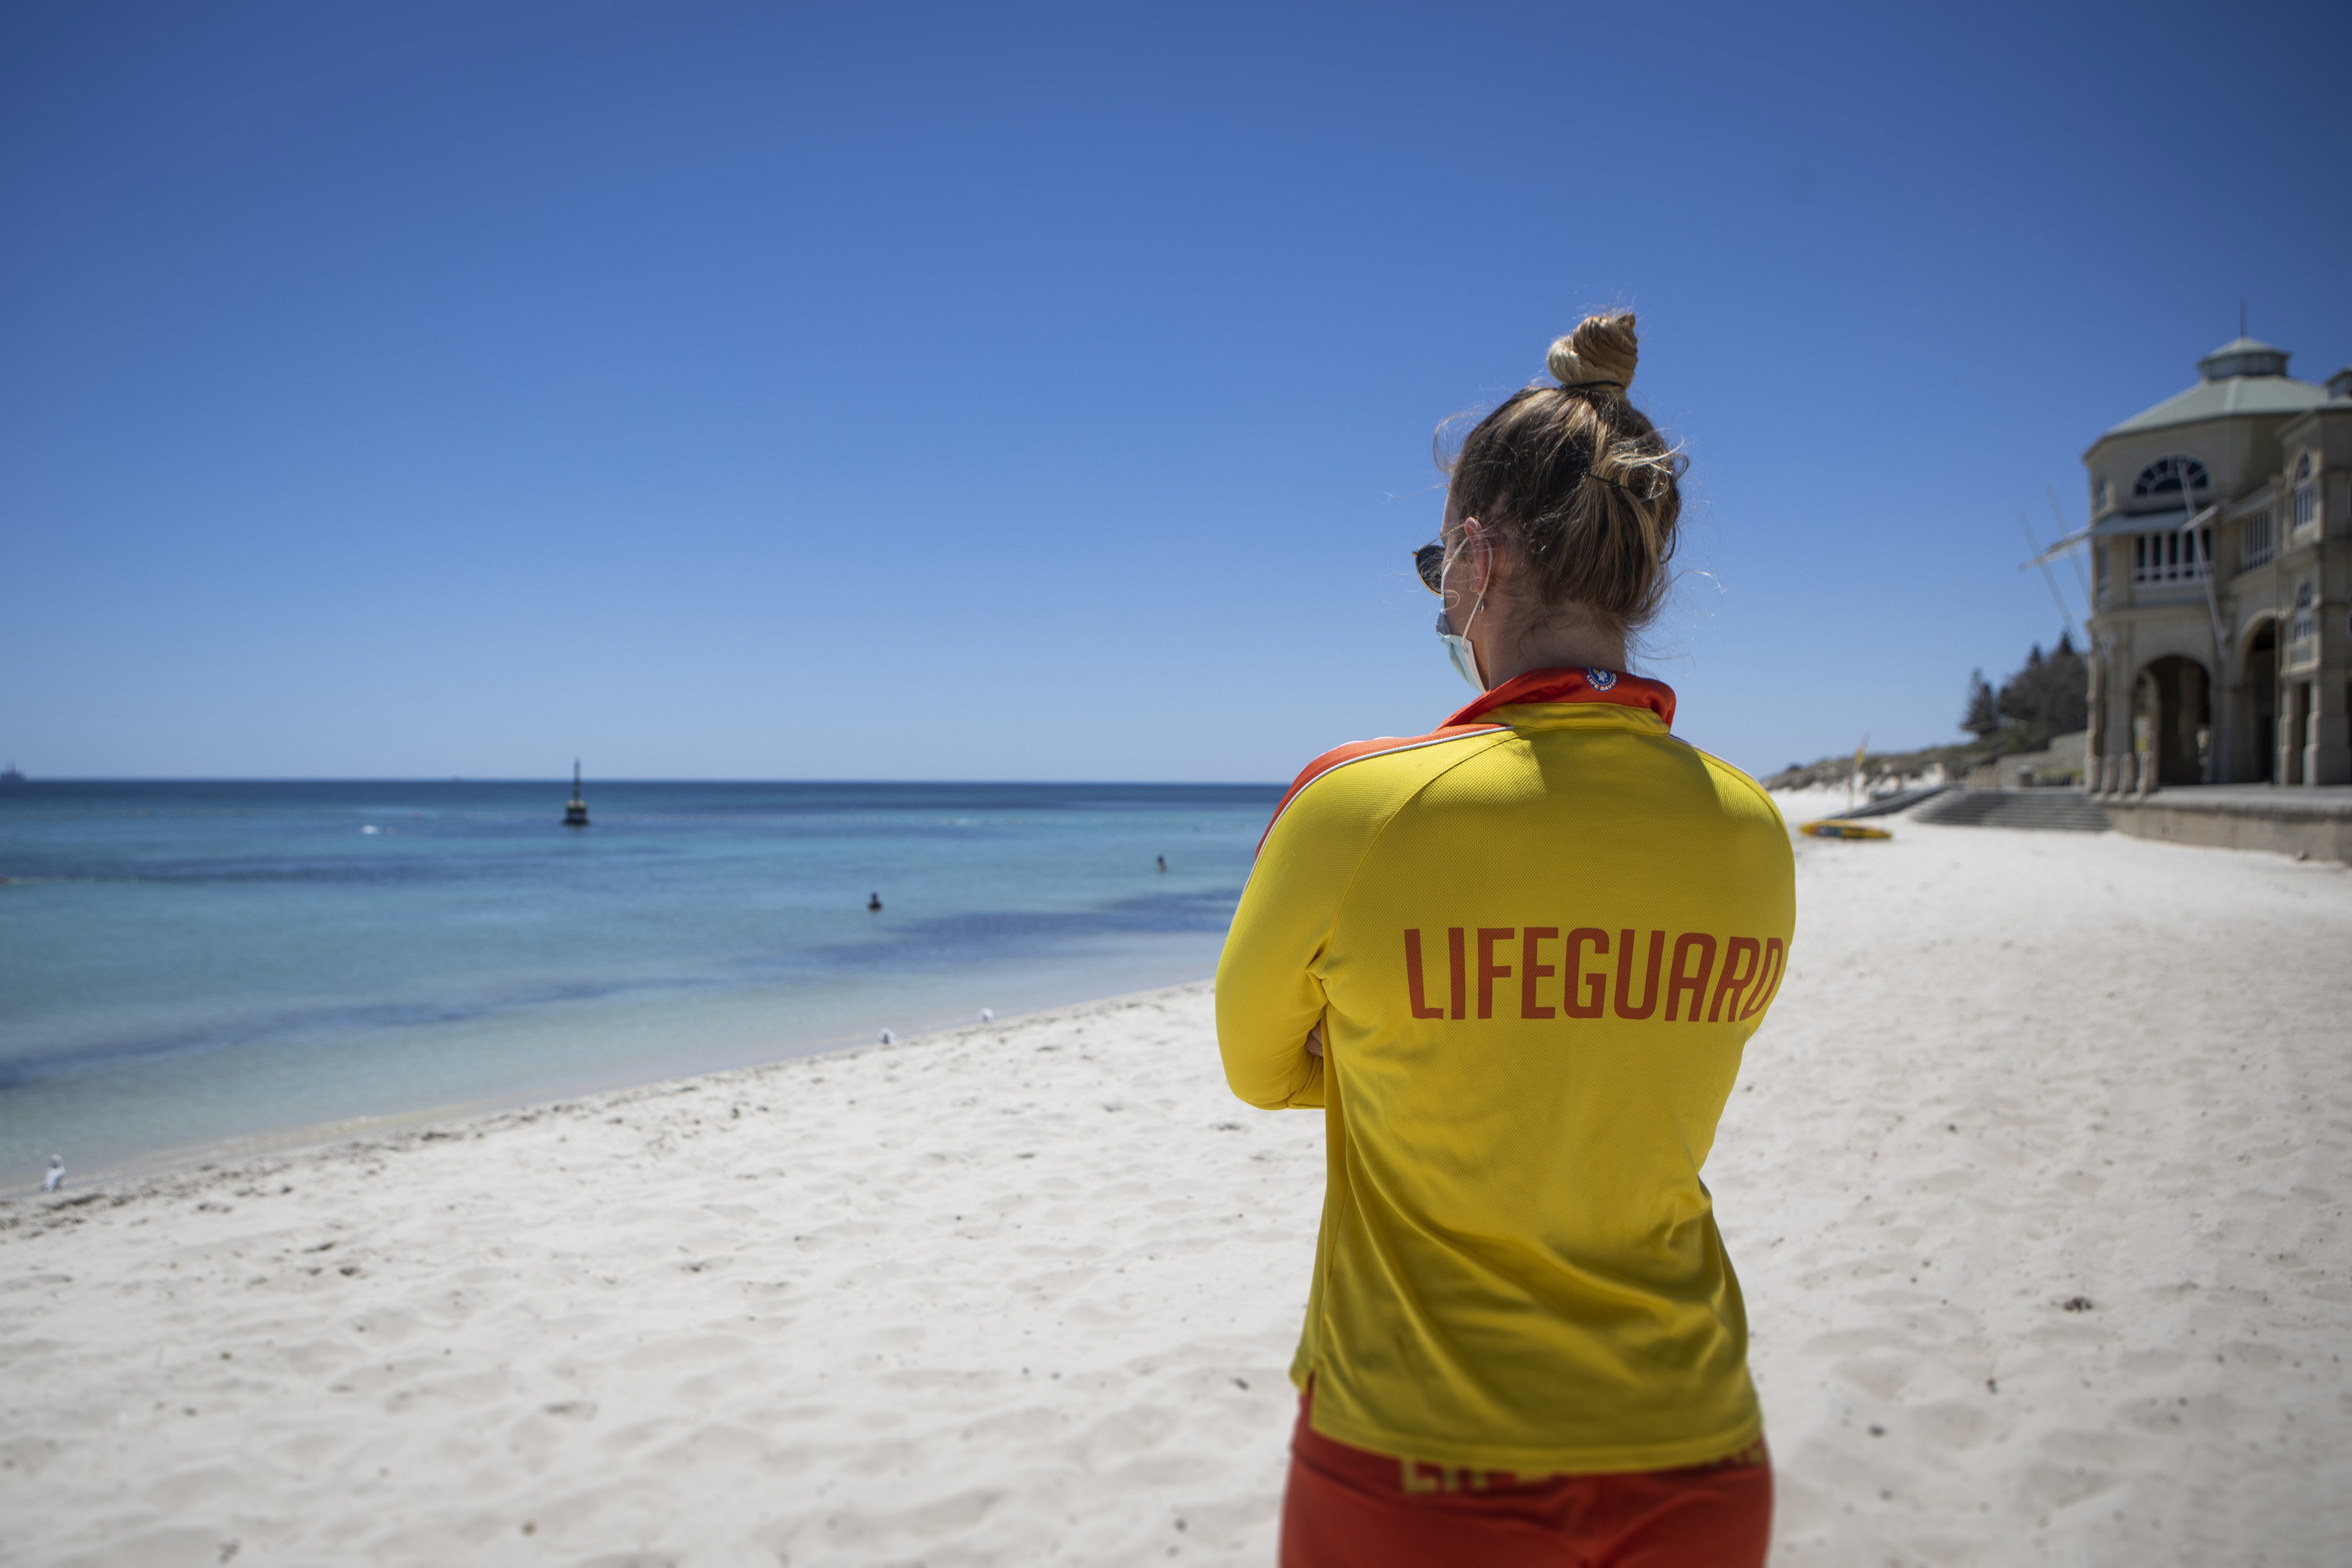 Lifeguard in yellow jacket watching over a beach